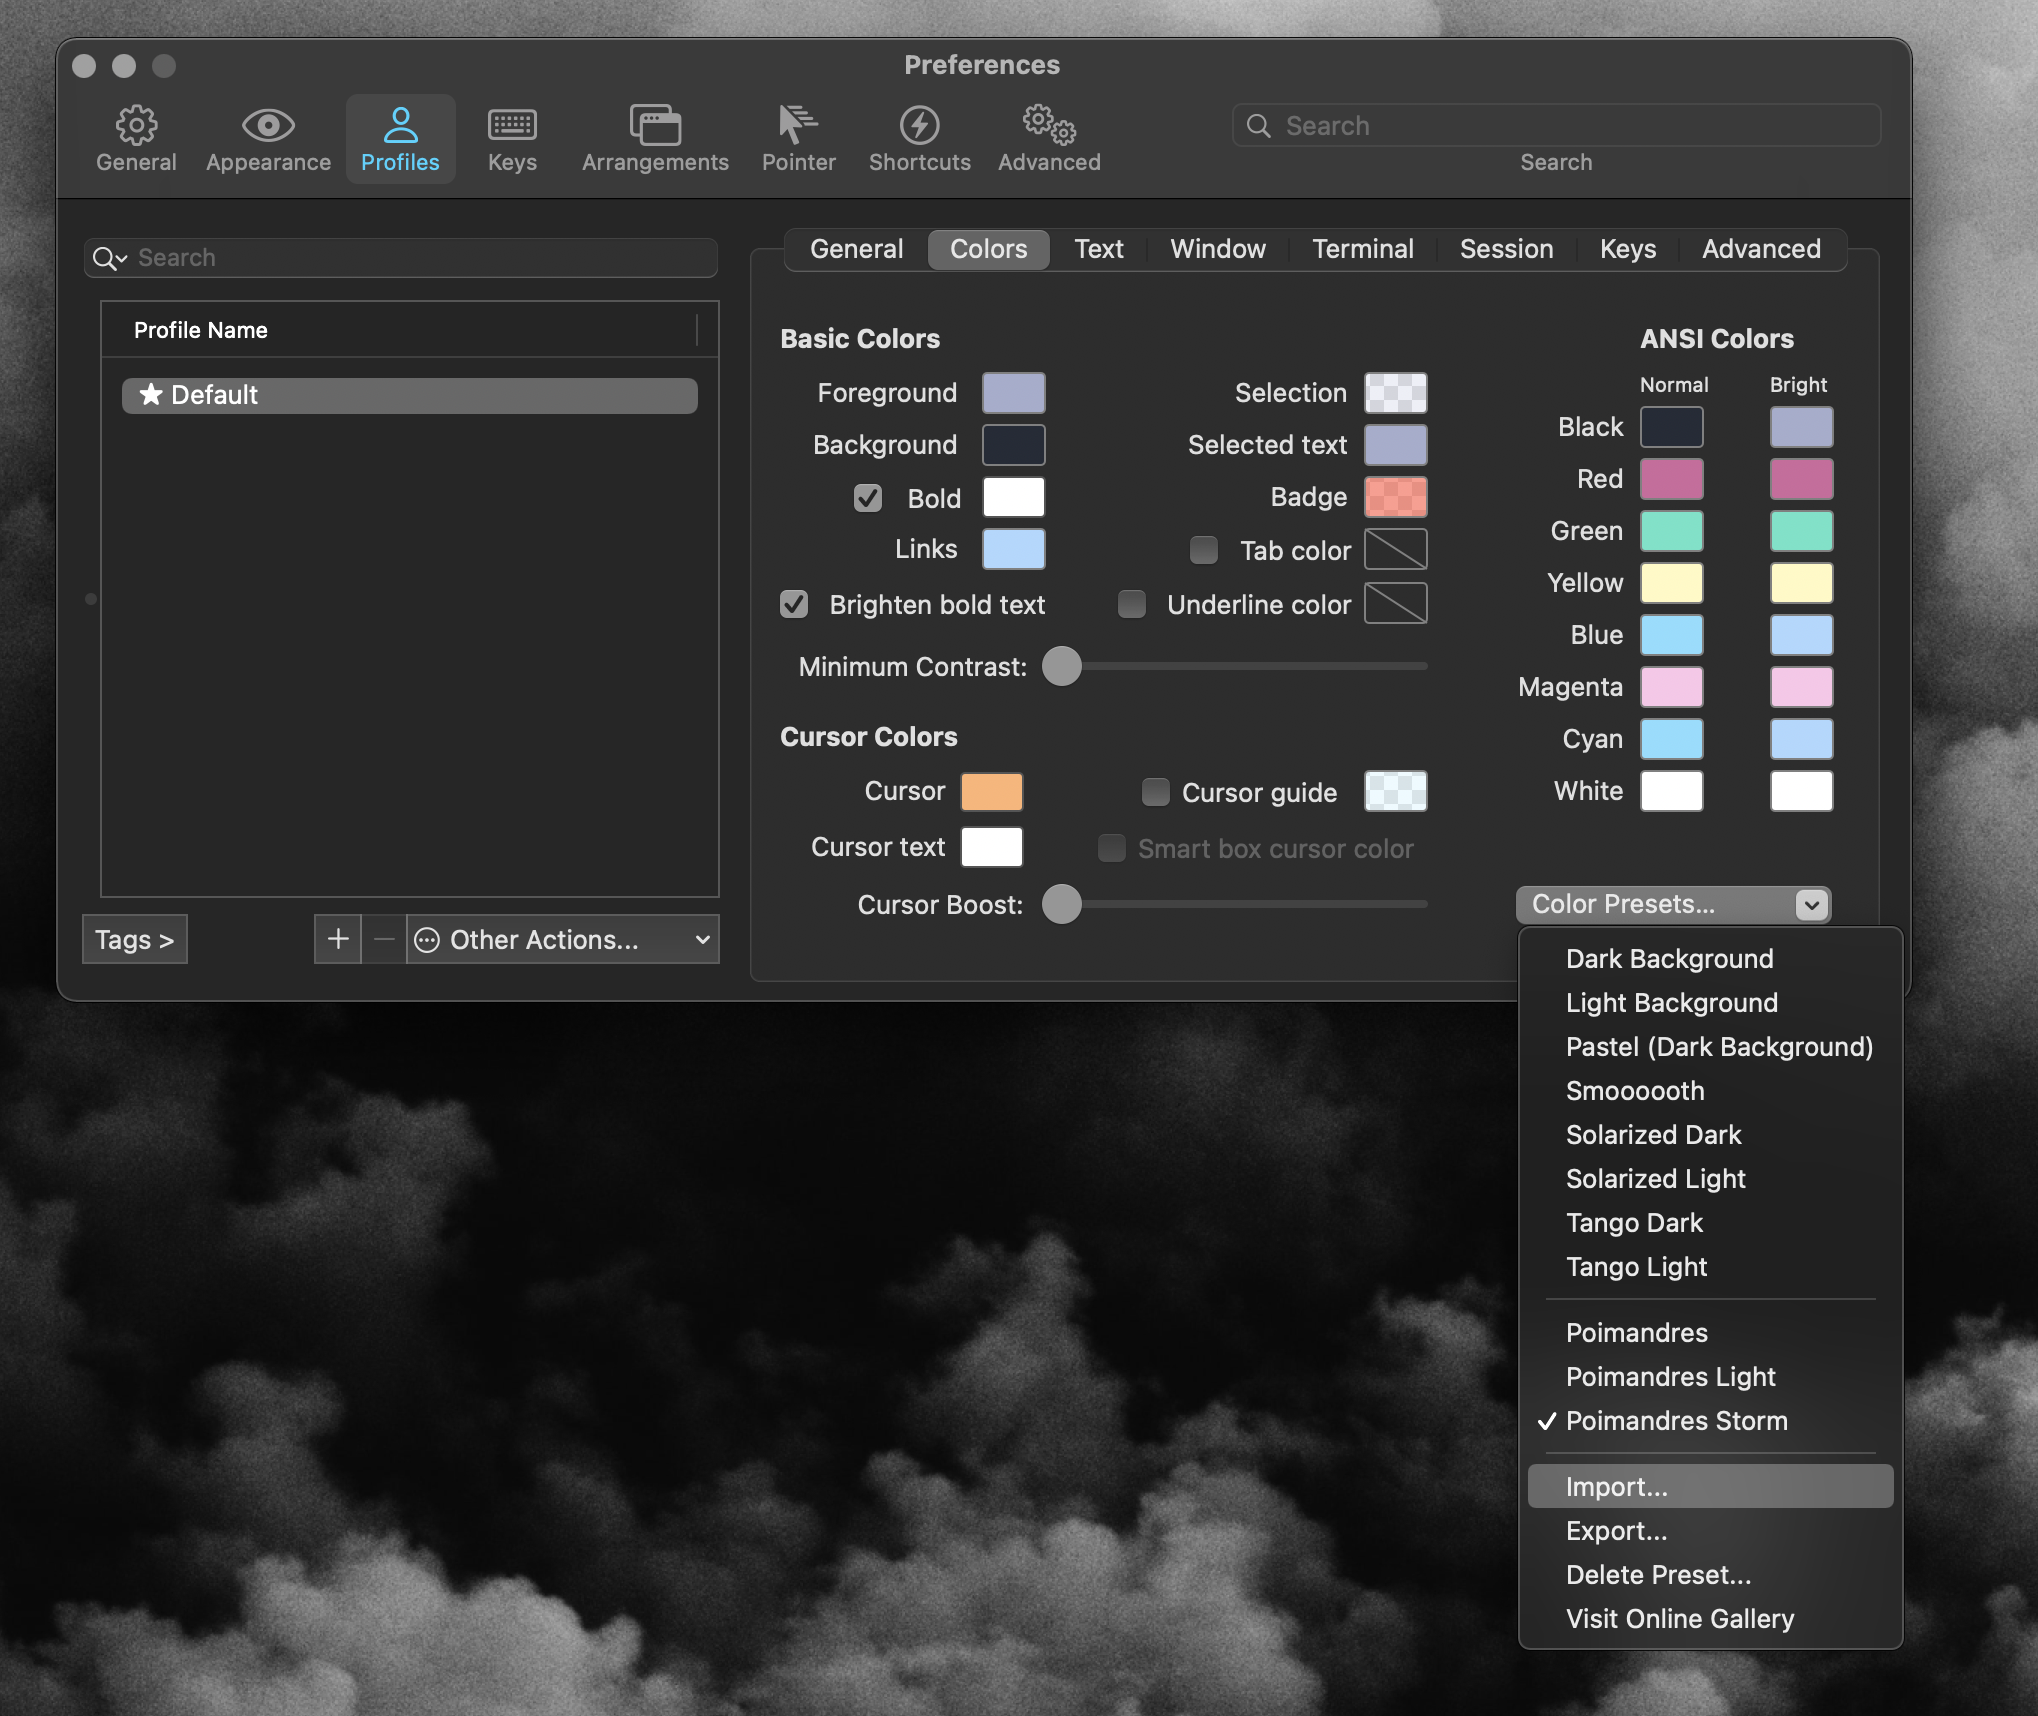 Importing a theme